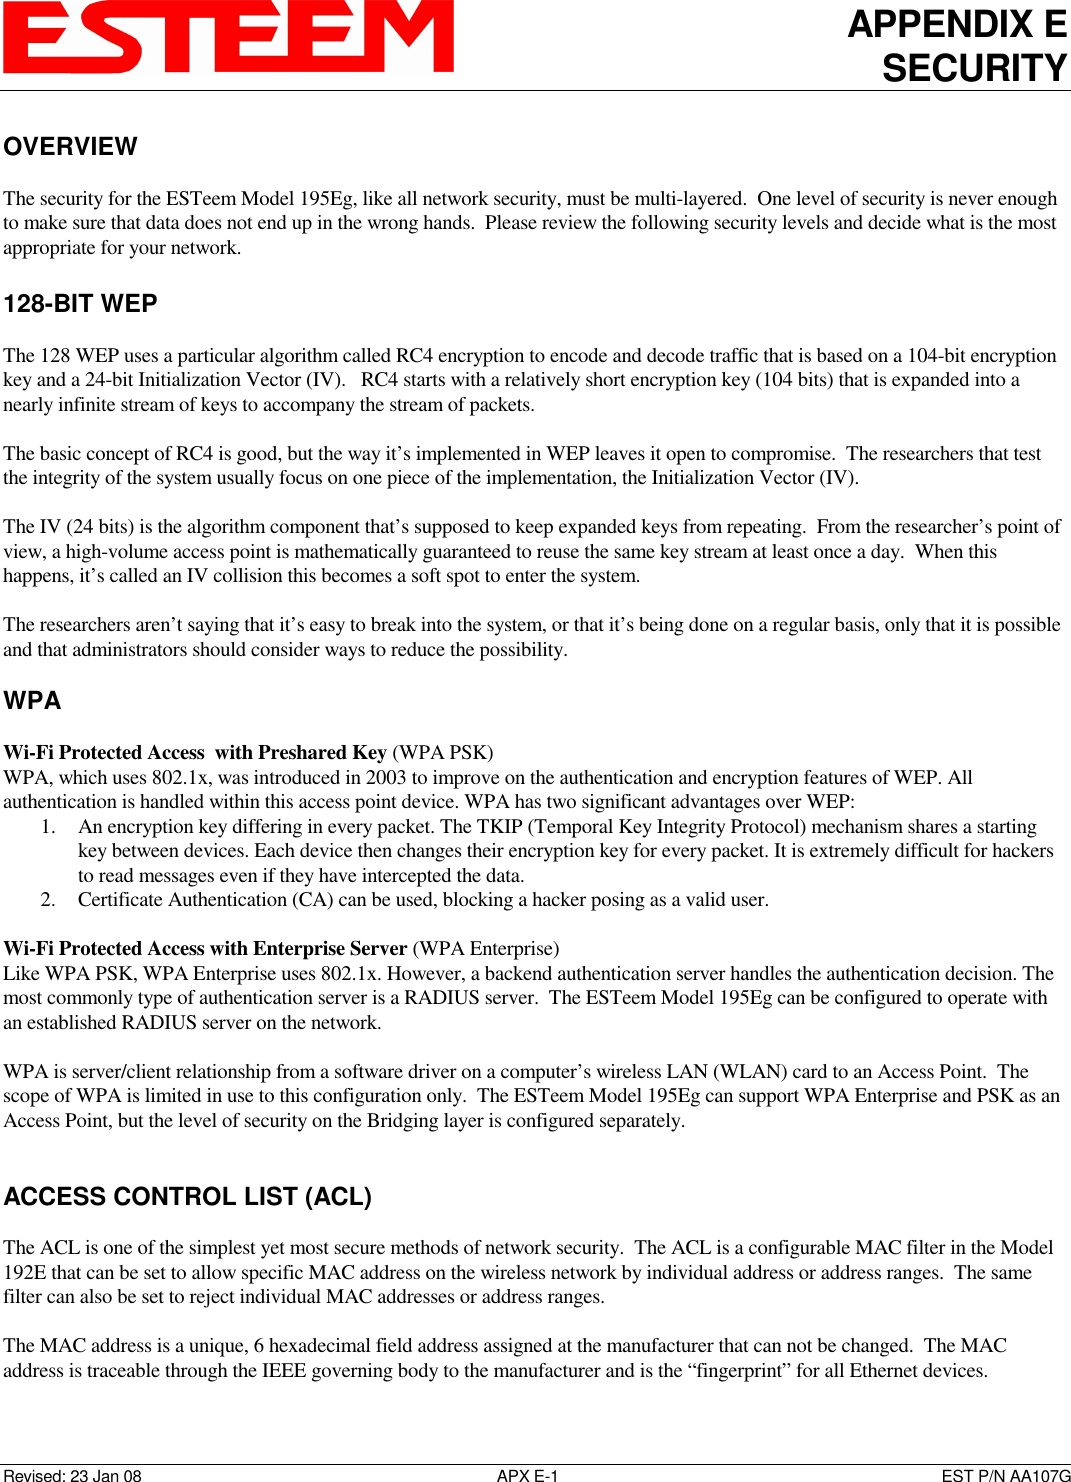 APPENDIX E SECURITY   Revised: 23 Jan 08  APX E-1  EST P/N AA107G OVERVIEW  The security for the ESTeem Model 195Eg, like all network security, must be multi-layered.  One level of security is never enough to make sure that data does not end up in the wrong hands.  Please review the following security levels and decide what is the most appropriate for your network.  128-BIT WEP  The 128 WEP uses a particular algorithm called RC4 encryption to encode and decode traffic that is based on a 104-bit encryption key and a 24-bit Initialization Vector (IV).   RC4 starts with a relatively short encryption key (104 bits) that is expanded into a nearly infinite stream of keys to accompany the stream of packets.   The basic concept of RC4 is good, but the way it’s implemented in WEP leaves it open to compromise.  The researchers that test the integrity of the system usually focus on one piece of the implementation, the Initialization Vector (IV).    The IV (24 bits) is the algorithm component that’s supposed to keep expanded keys from repeating.  From the researcher’s point of view, a high-volume access point is mathematically guaranteed to reuse the same key stream at least once a day.  When this happens, it’s called an IV collision this becomes a soft spot to enter the system.    The researchers aren’t saying that it’s easy to break into the system, or that it’s being done on a regular basis, only that it is possible and that administrators should consider ways to reduce the possibility.   WPA  Wi-Fi Protected Access  with Preshared Key (WPA PSK) WPA, which uses 802.1x, was introduced in 2003 to improve on the authentication and encryption features of WEP. All authentication is handled within this access point device. WPA has two significant advantages over WEP:  1. An encryption key differing in every packet. The TKIP (Temporal Key Integrity Protocol) mechanism shares a starting key between devices. Each device then changes their encryption key for every packet. It is extremely difficult for hackers to read messages even if they have intercepted the data.  2. Certificate Authentication (CA) can be used, blocking a hacker posing as a valid user.   Wi-Fi Protected Access with Enterprise Server (WPA Enterprise) Like WPA PSK, WPA Enterprise uses 802.1x. However, a backend authentication server handles the authentication decision. The most commonly type of authentication server is a RADIUS server.  The ESTeem Model 195Eg can be configured to operate with an established RADIUS server on the network.  WPA is server/client relationship from a software driver on a computer’s wireless LAN (WLAN) card to an Access Point.  The scope of WPA is limited in use to this configuration only.  The ESTeem Model 195Eg can support WPA Enterprise and PSK as an Access Point, but the level of security on the Bridging layer is configured separately.   ACCESS CONTROL LIST (ACL)  The ACL is one of the simplest yet most secure methods of network security.  The ACL is a configurable MAC filter in the Model 192E that can be set to allow specific MAC address on the wireless network by individual address or address ranges.  The same filter can also be set to reject individual MAC addresses or address ranges.  The MAC address is a unique, 6 hexadecimal field address assigned at the manufacturer that can not be changed.  The MAC address is traceable through the IEEE governing body to the manufacturer and is the “fingerprint” for all Ethernet devices.  